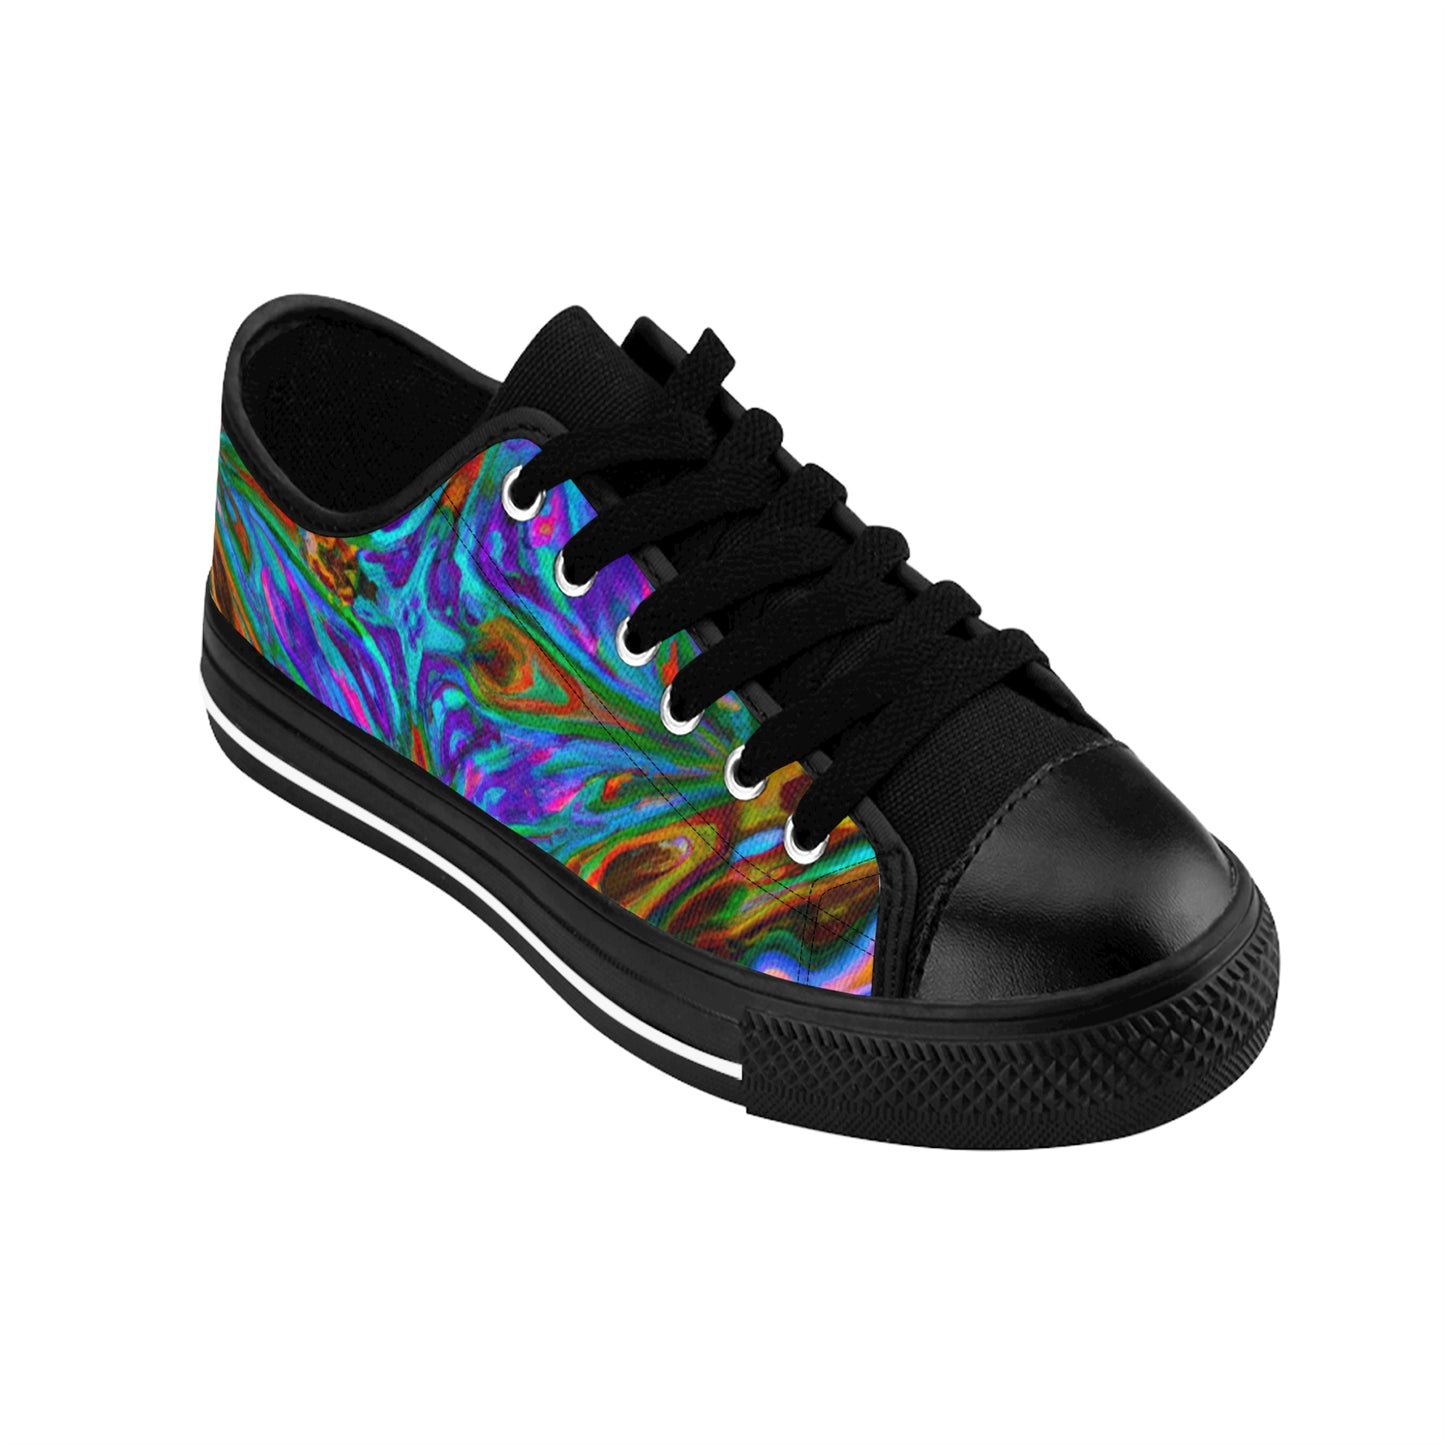 Winfreda the Cobblersmith - Psychedelic Low Top